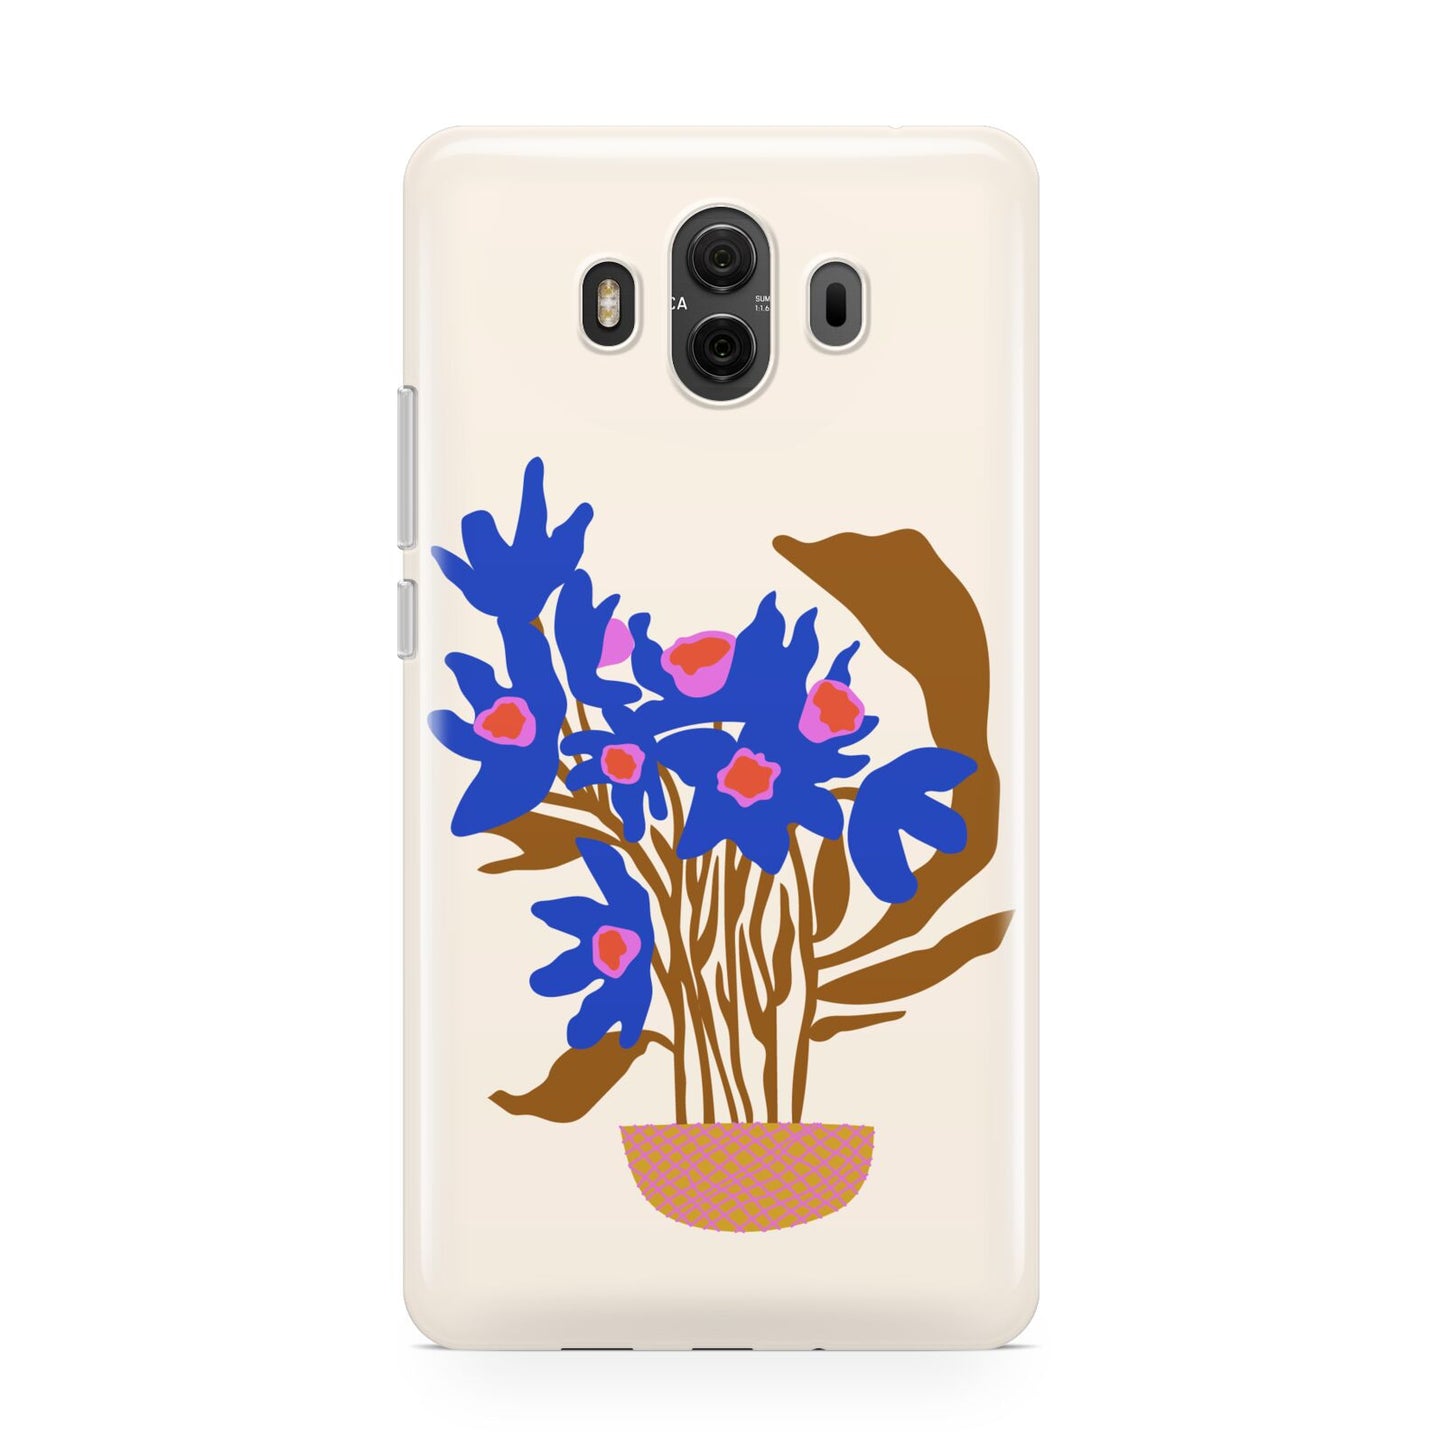 Flowers in a Vase Huawei Mate 10 Protective Phone Case